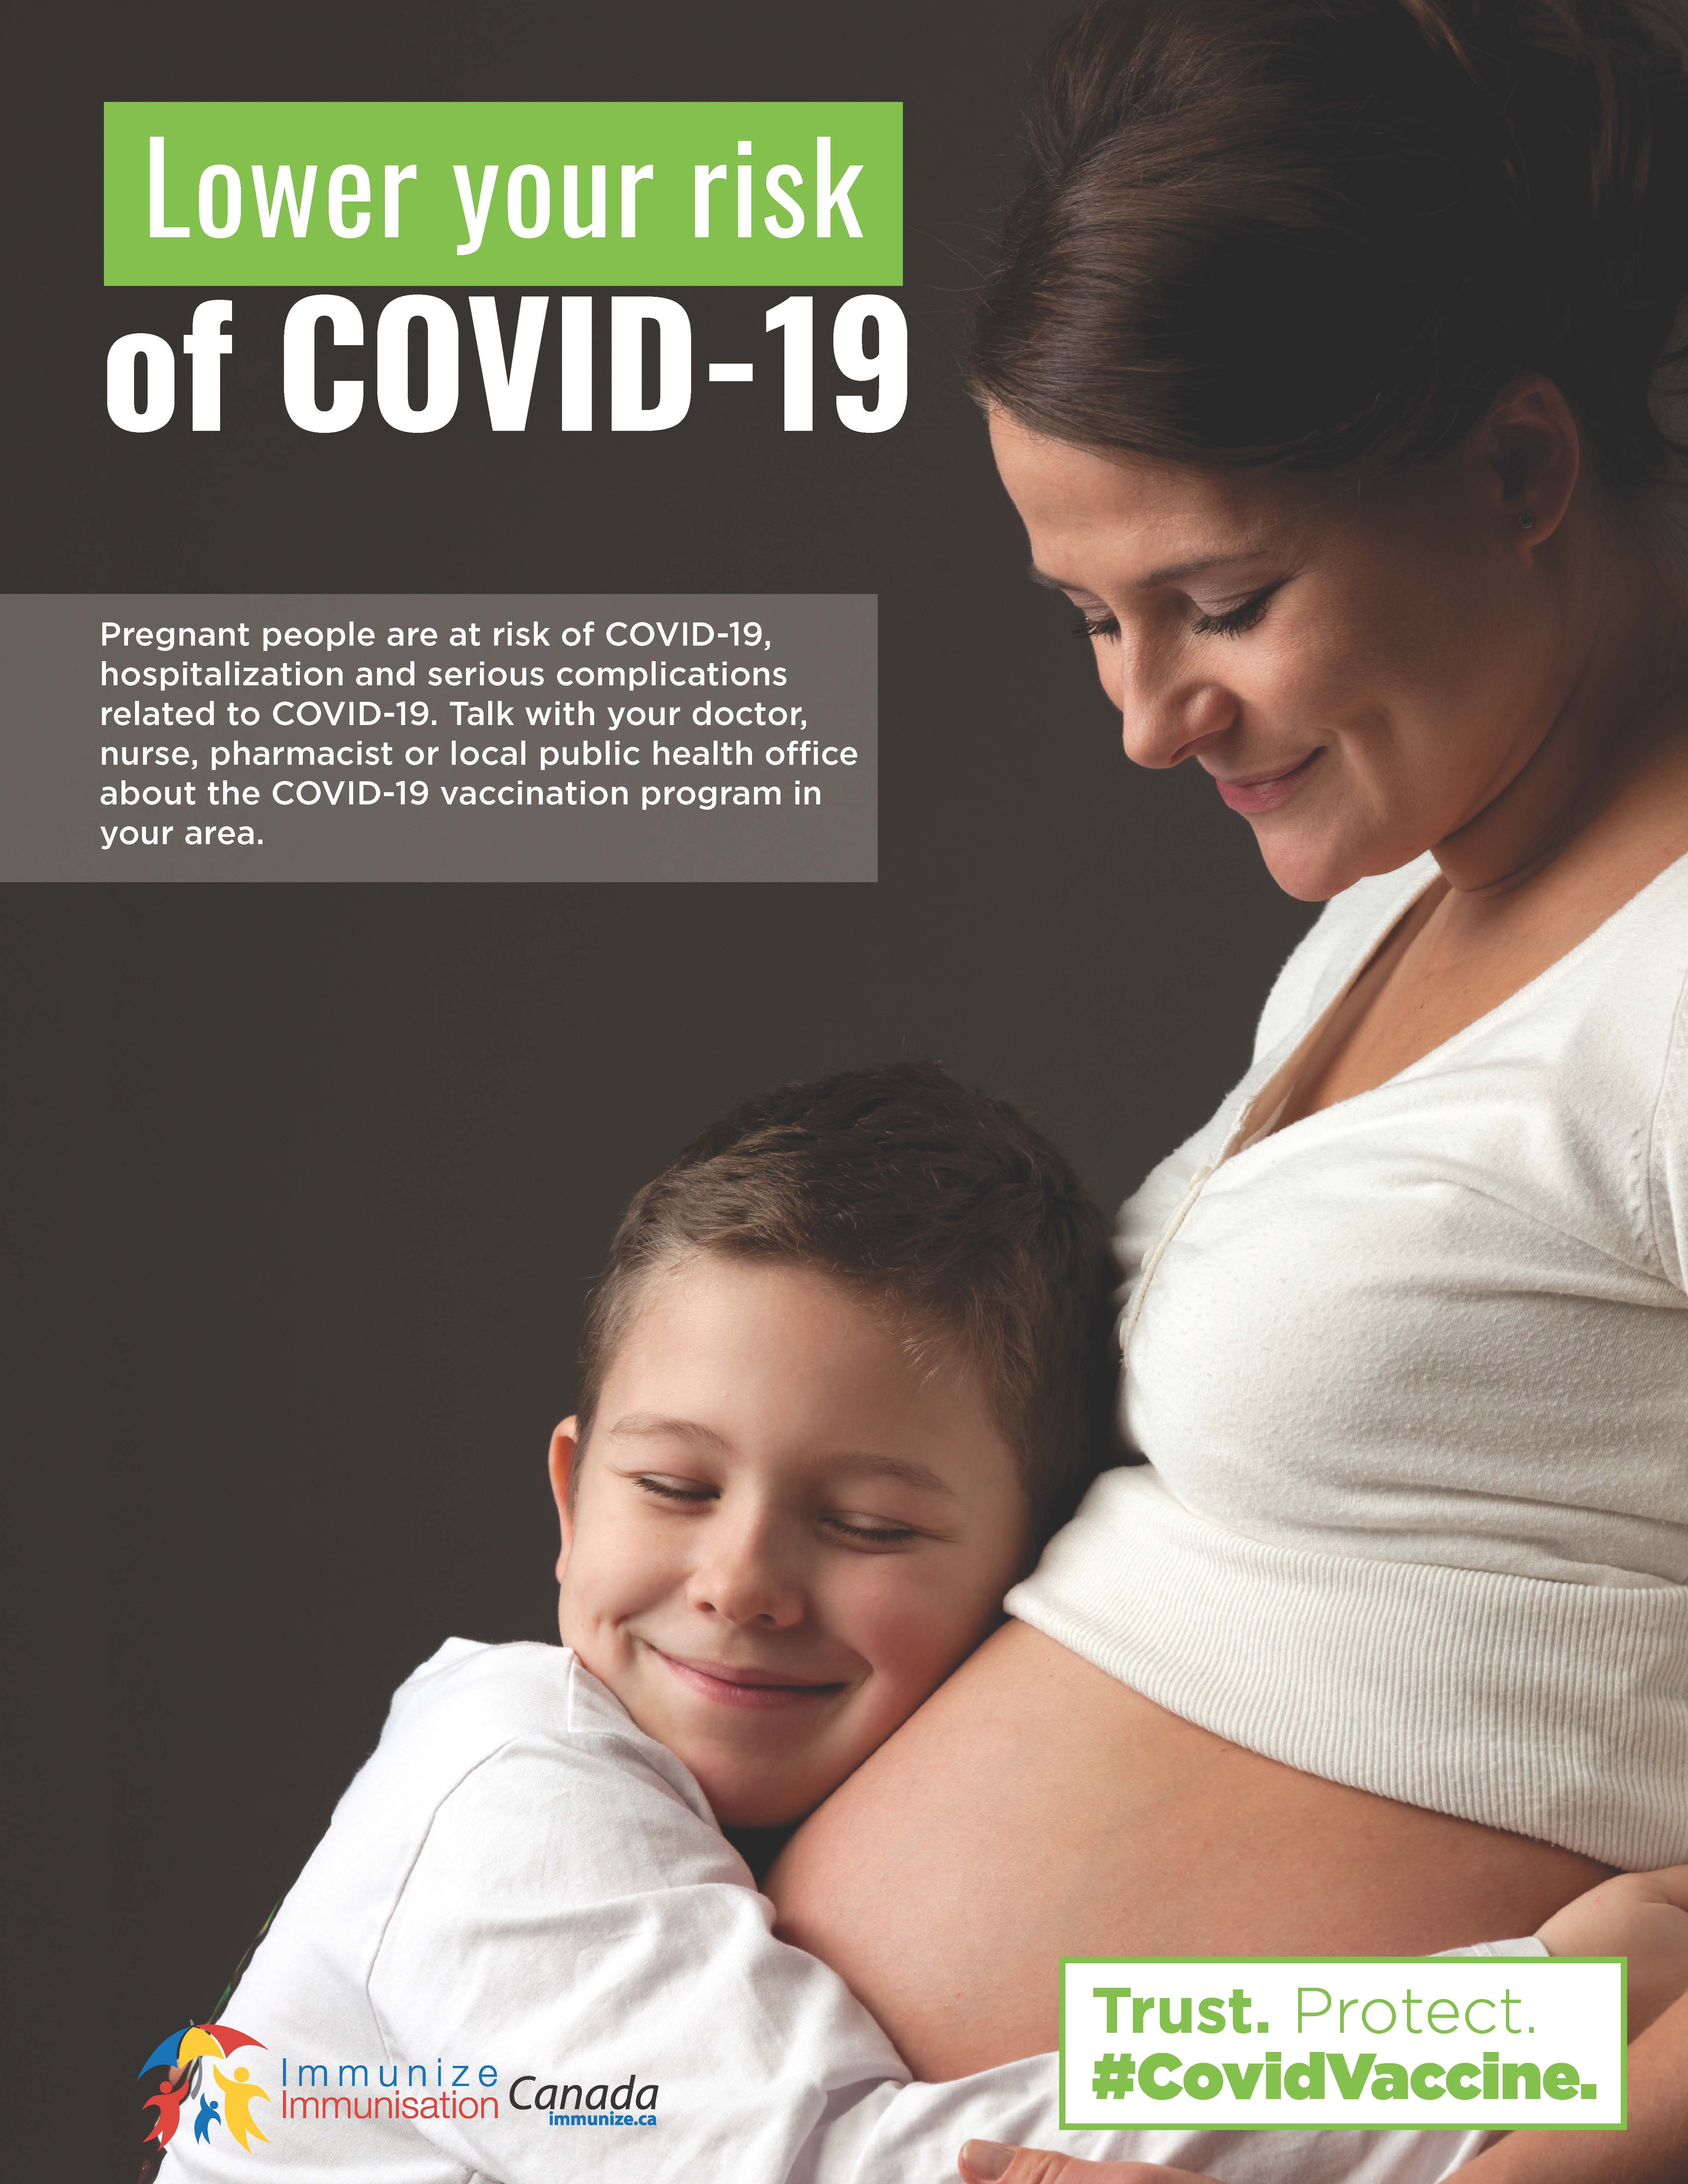 Lower your risk of COVID-19: pregnant people